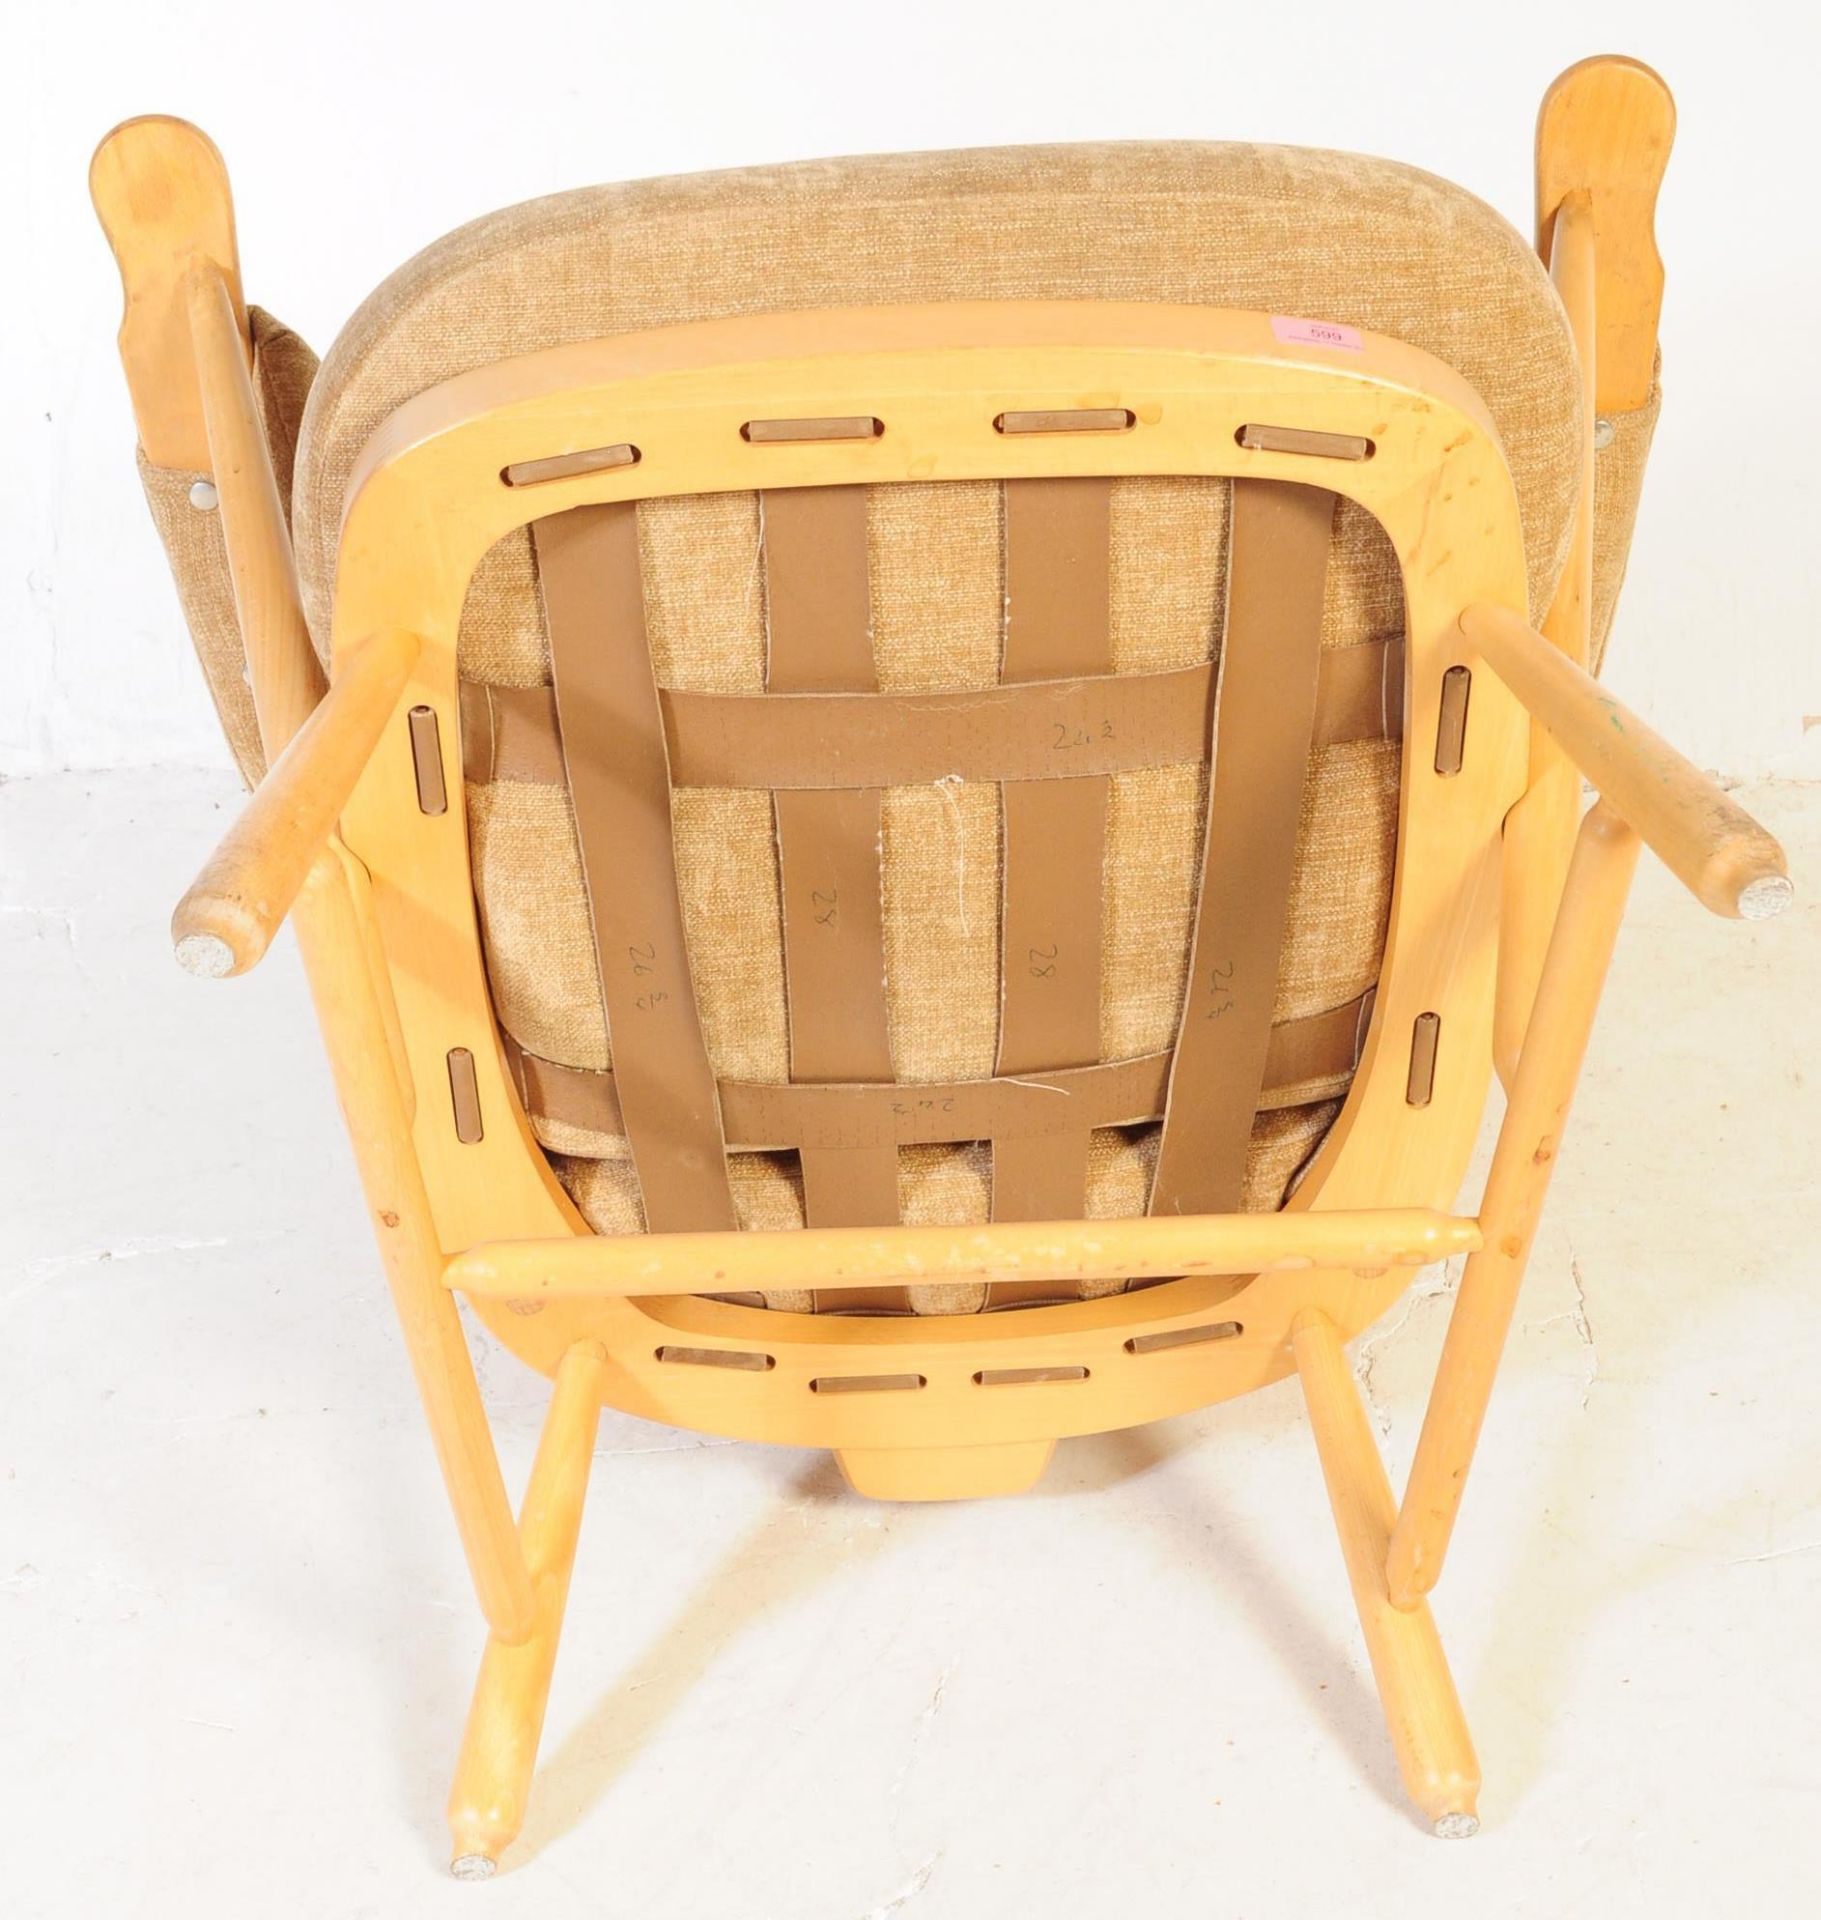 VINTAGE MID 20TH CENTURY ERCOL CONSERVATORY ARMCHAIR - Image 6 of 6